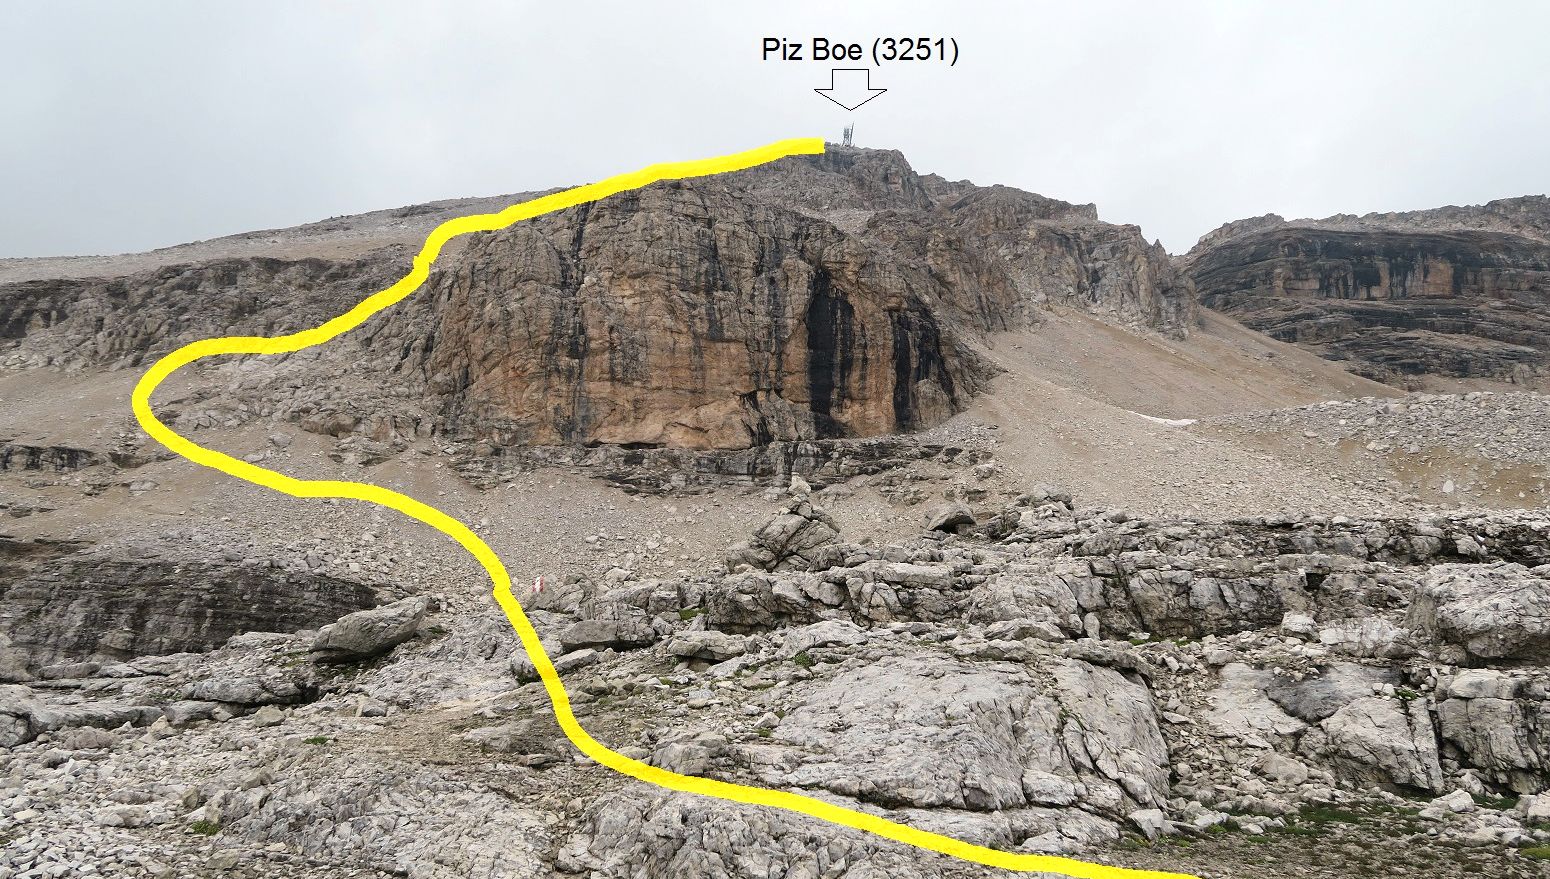 Ascent route on Piz Boe in the Sella Group of the Italian Dolomites